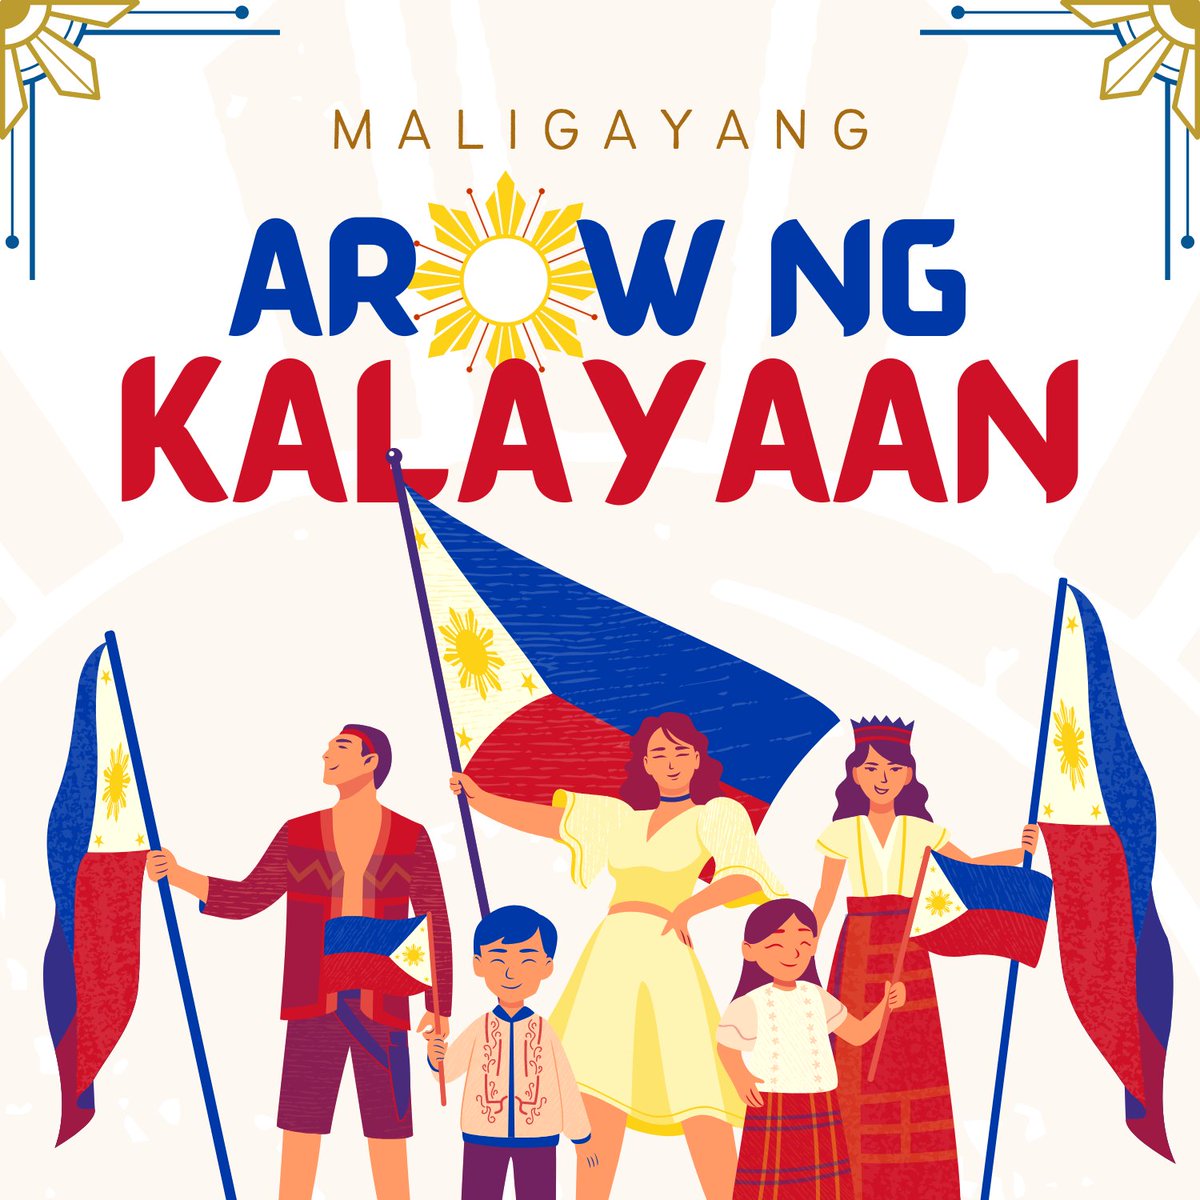 🇵🇭 HAPPY INDEPENDENCE DAY, PHILIPPINES! 🇵🇭

#PhilippineIndependenceDay 
#PhilippineIndependenceDay2023